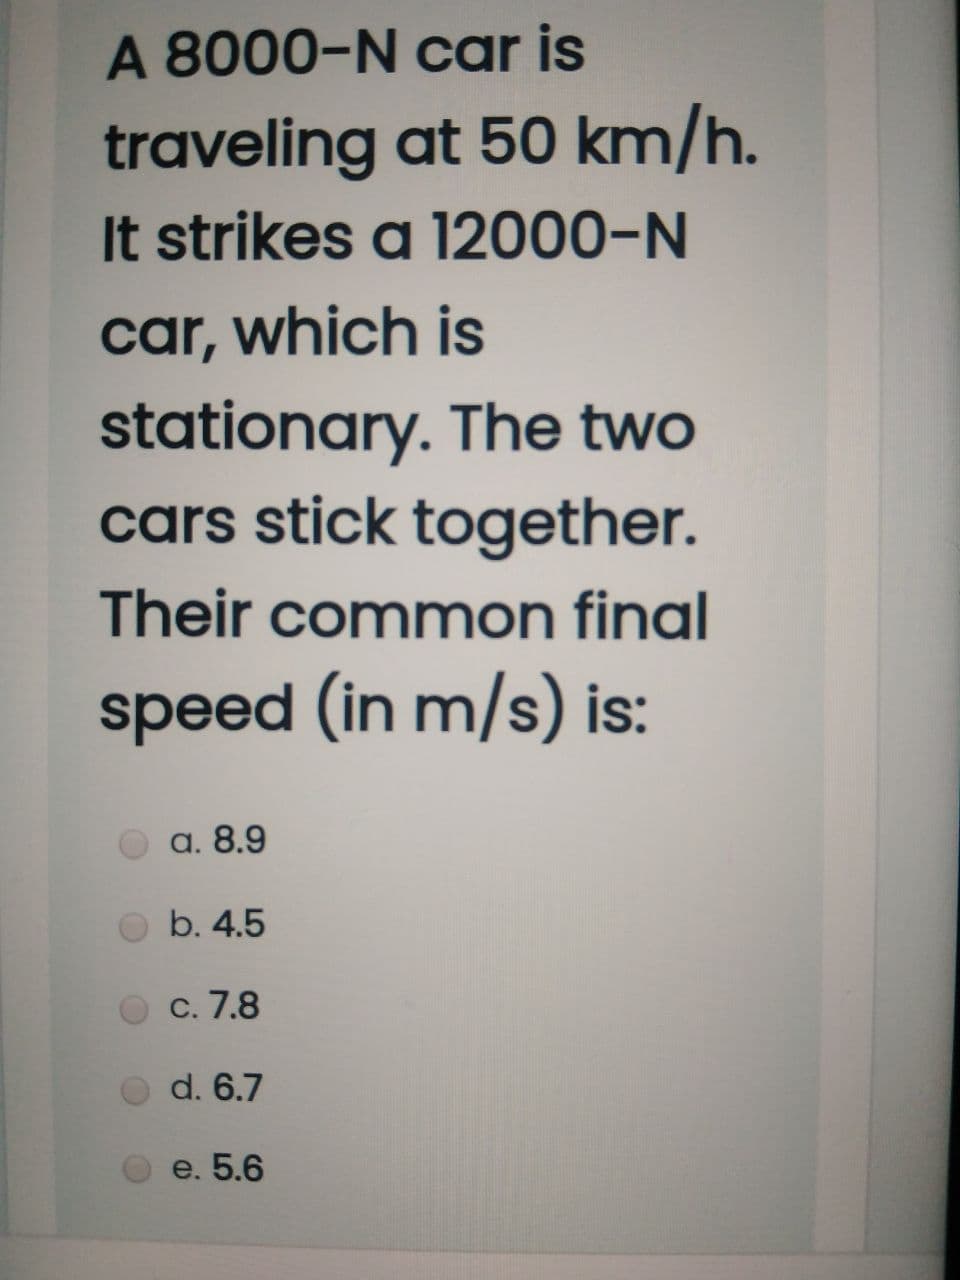 A 8000-N car is
traveling at 50 km/h.
It strikes a 12000-N
car, which is
stationary. The two
cars stick together.
Their common final
speed (in m/s) is:
a. 8.9
b. 4.5
С. 7.8
d. 6.7
e. 5.6
